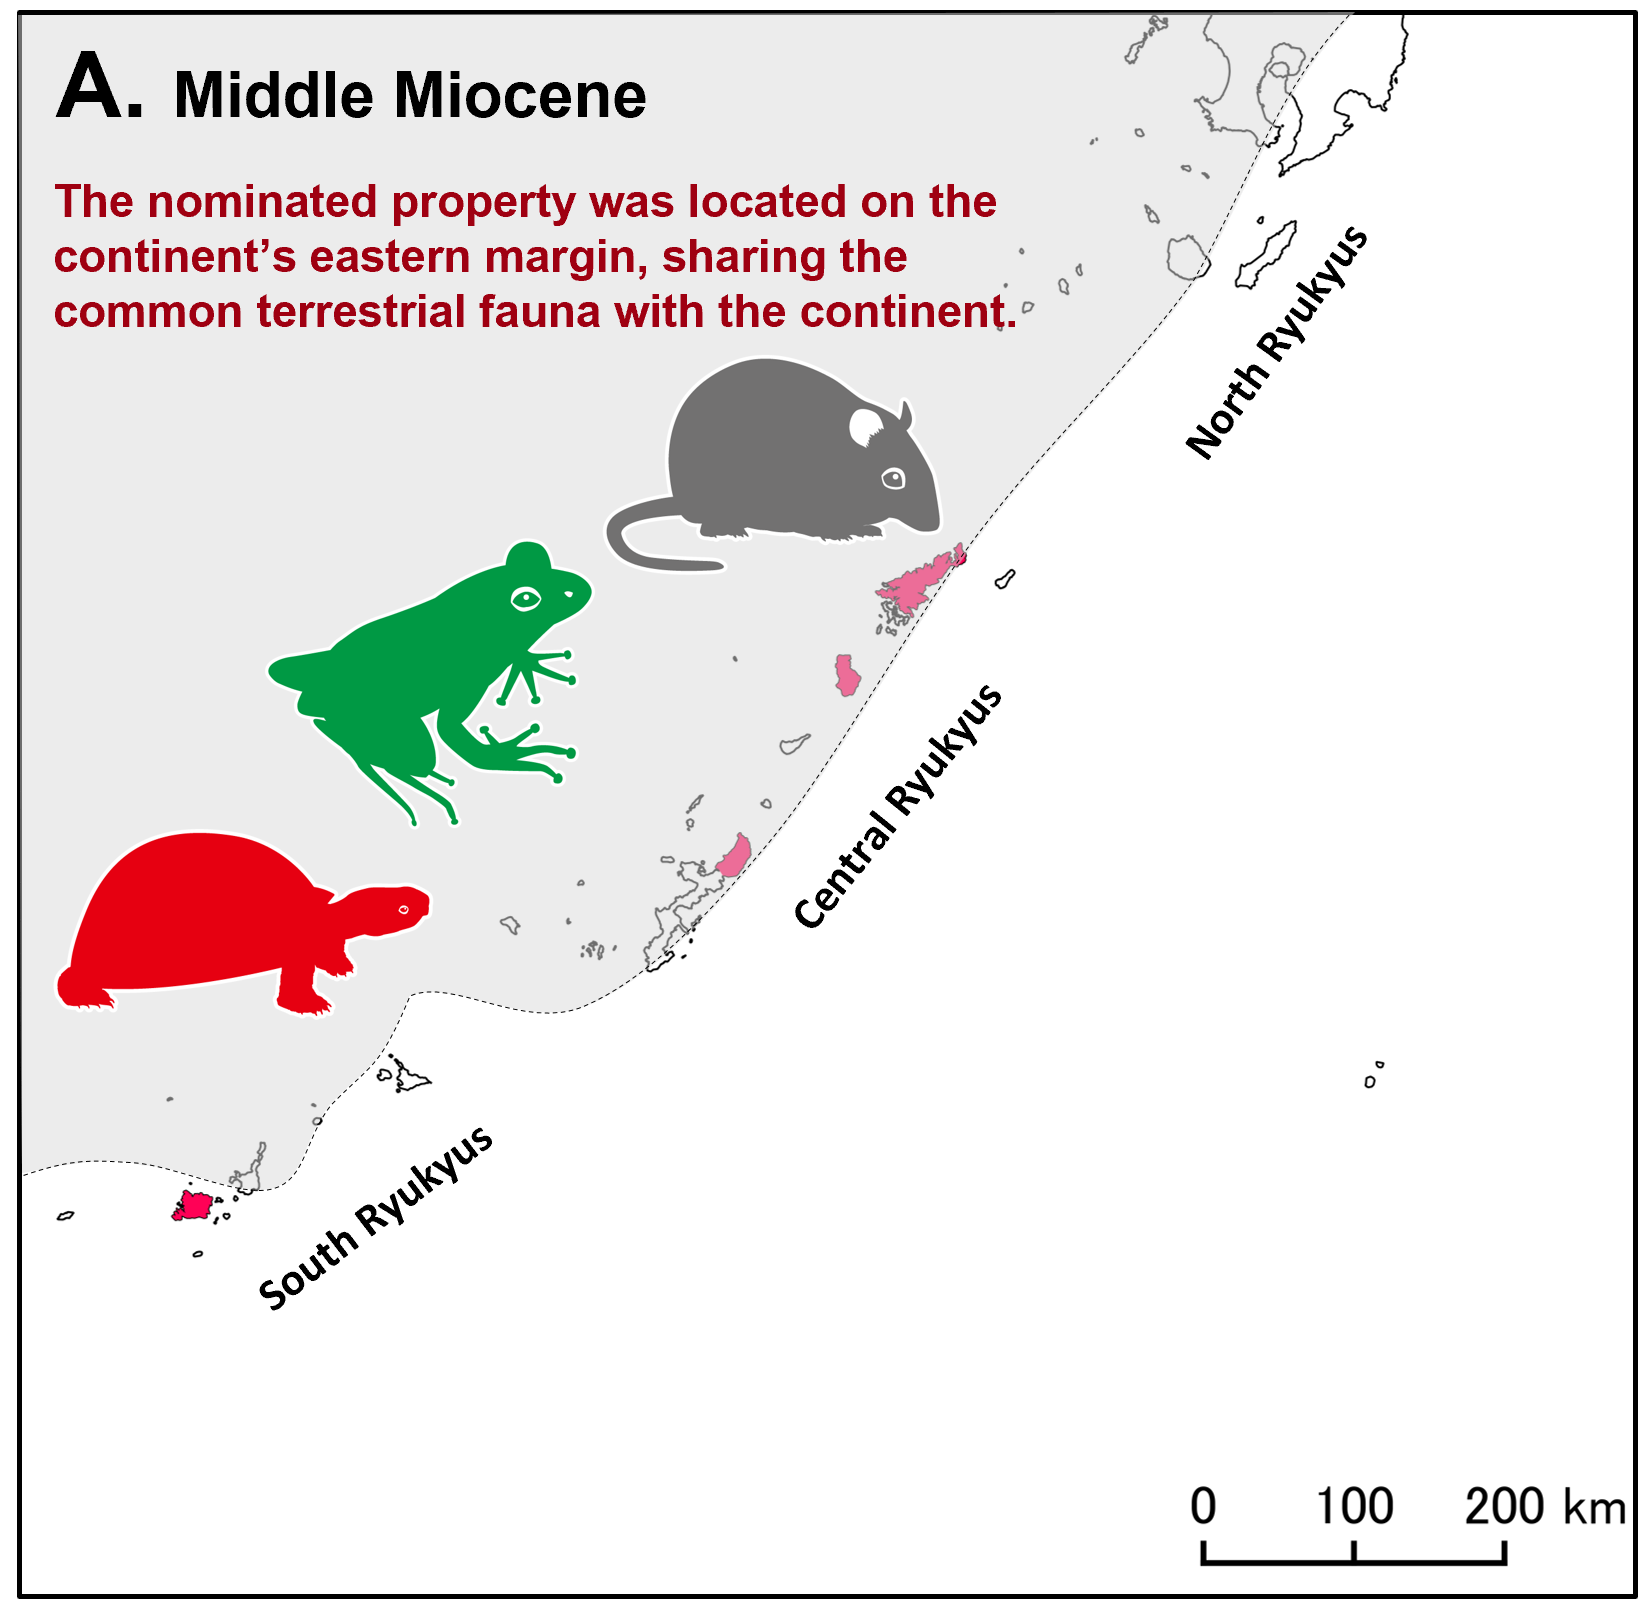 Before middle Miocene